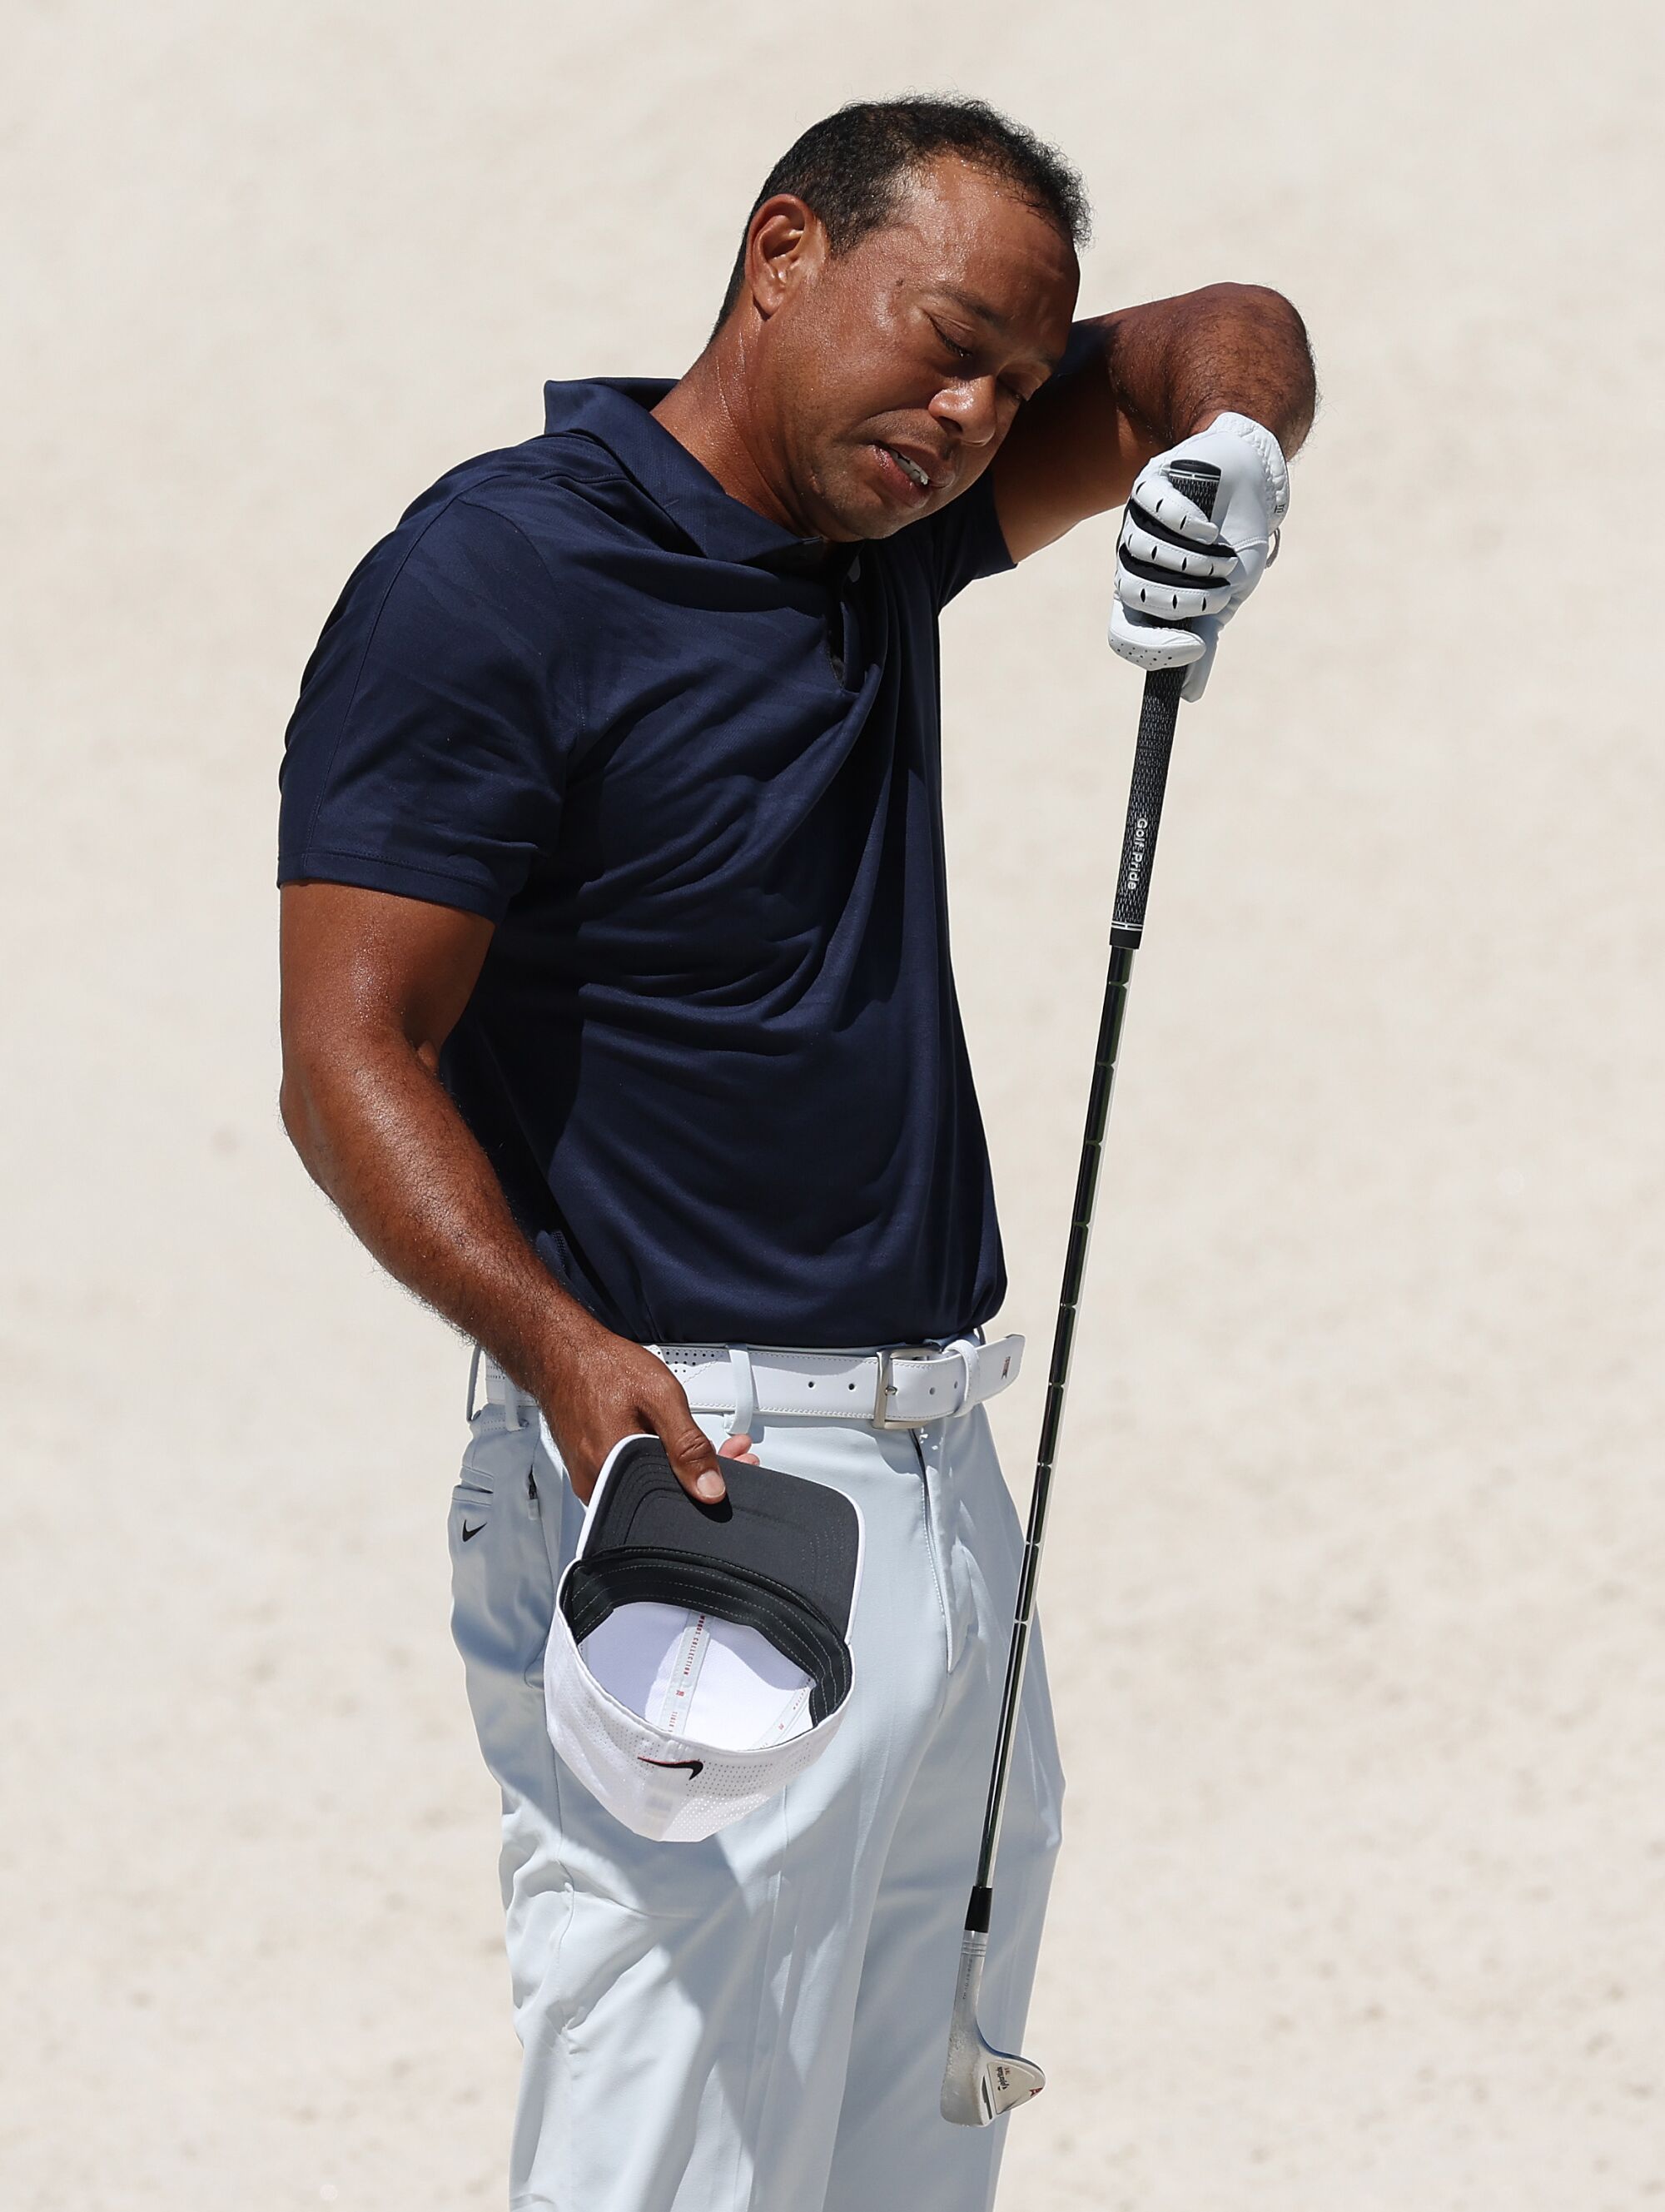 Tiger Woods wipes his face during a practice round before the Masters.